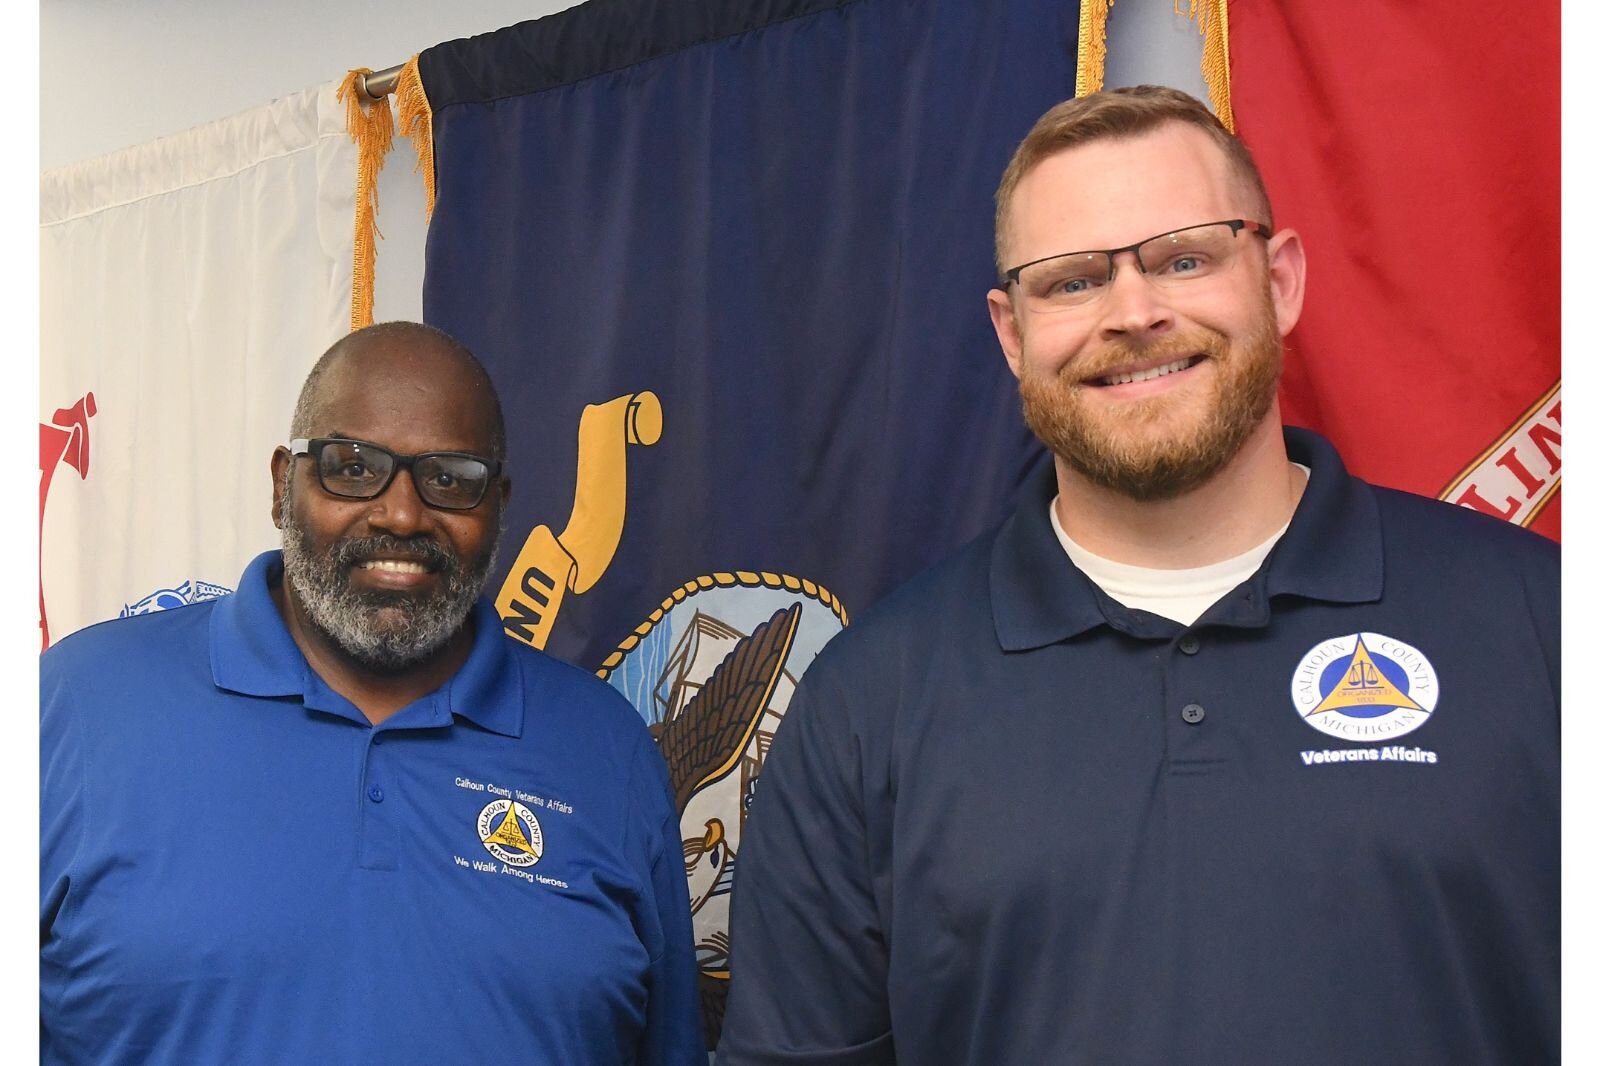 Sam Gray, Chairperson of the Advisory Committee, and Aaron Edlefson, Director, Calhoun County Veterans Affairs, stand in front of military service flags in the organization’s board room.